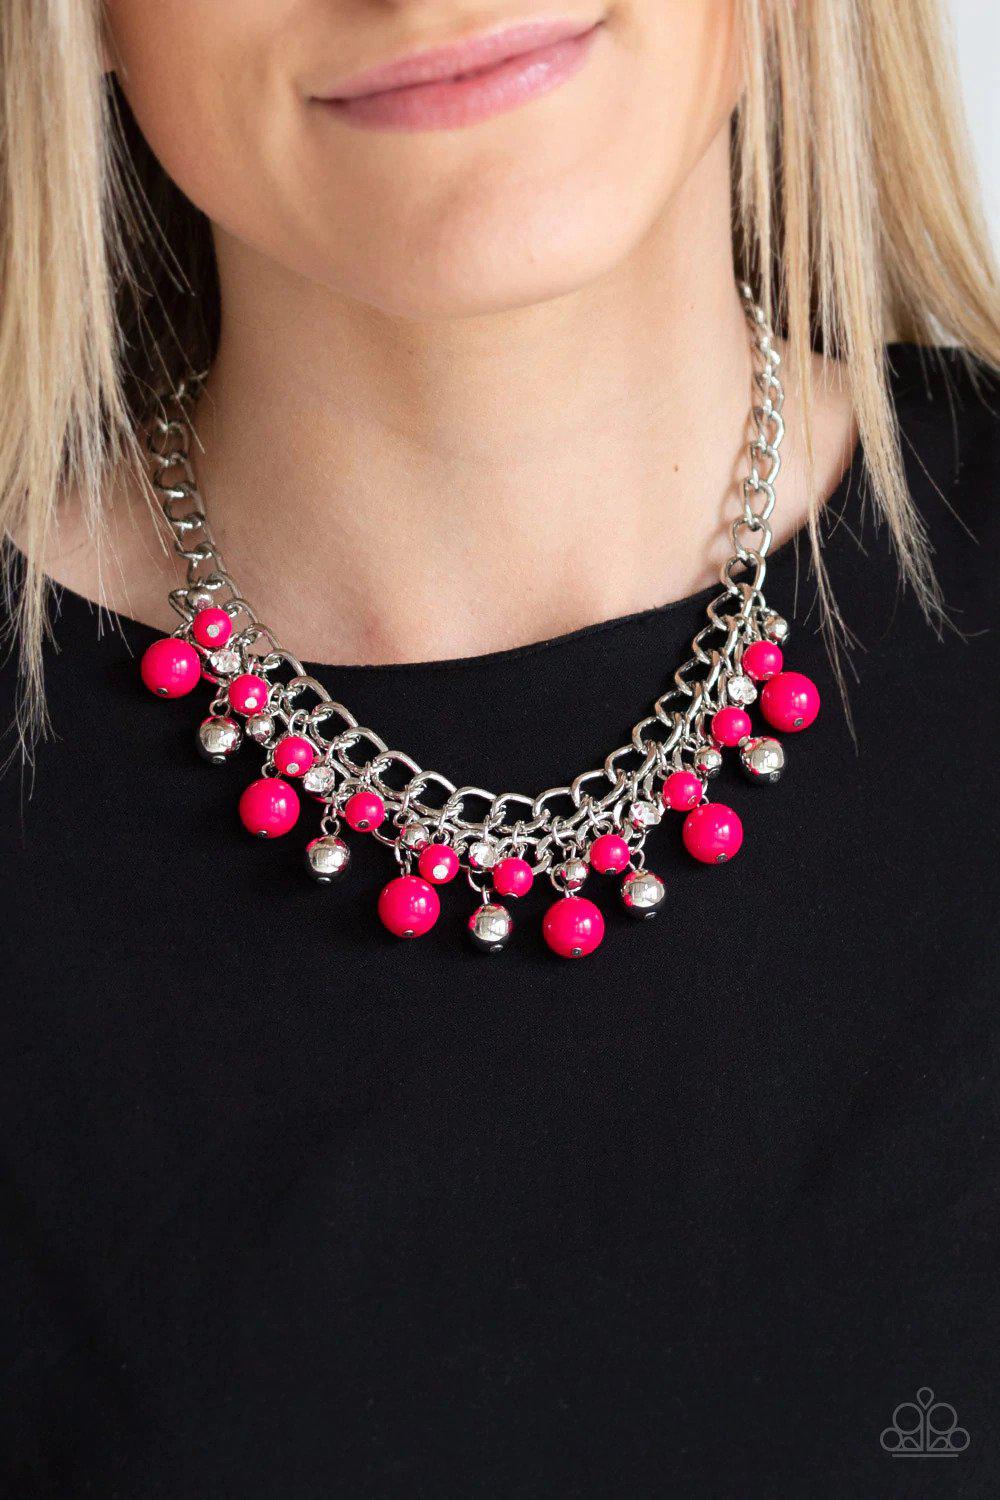 The Bride To BEAD Pink Necklace - Paparazzi Accessories- lightbox - CarasShop.com - $5 Jewelry by Cara Jewels